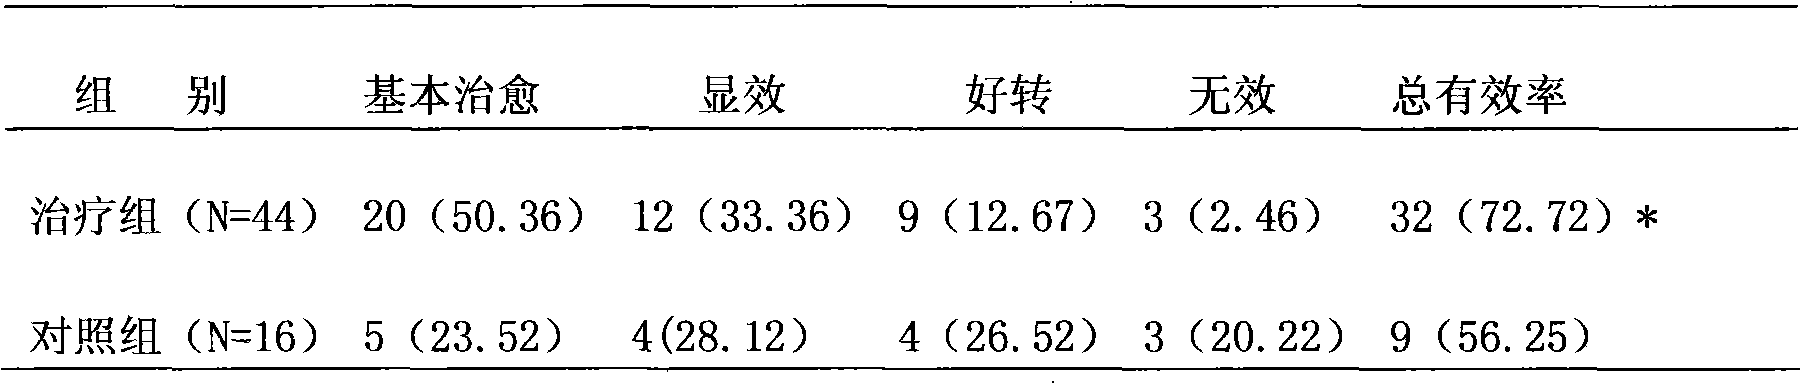 Formula of honey refined gum for treating chloasma and preparation method thereof